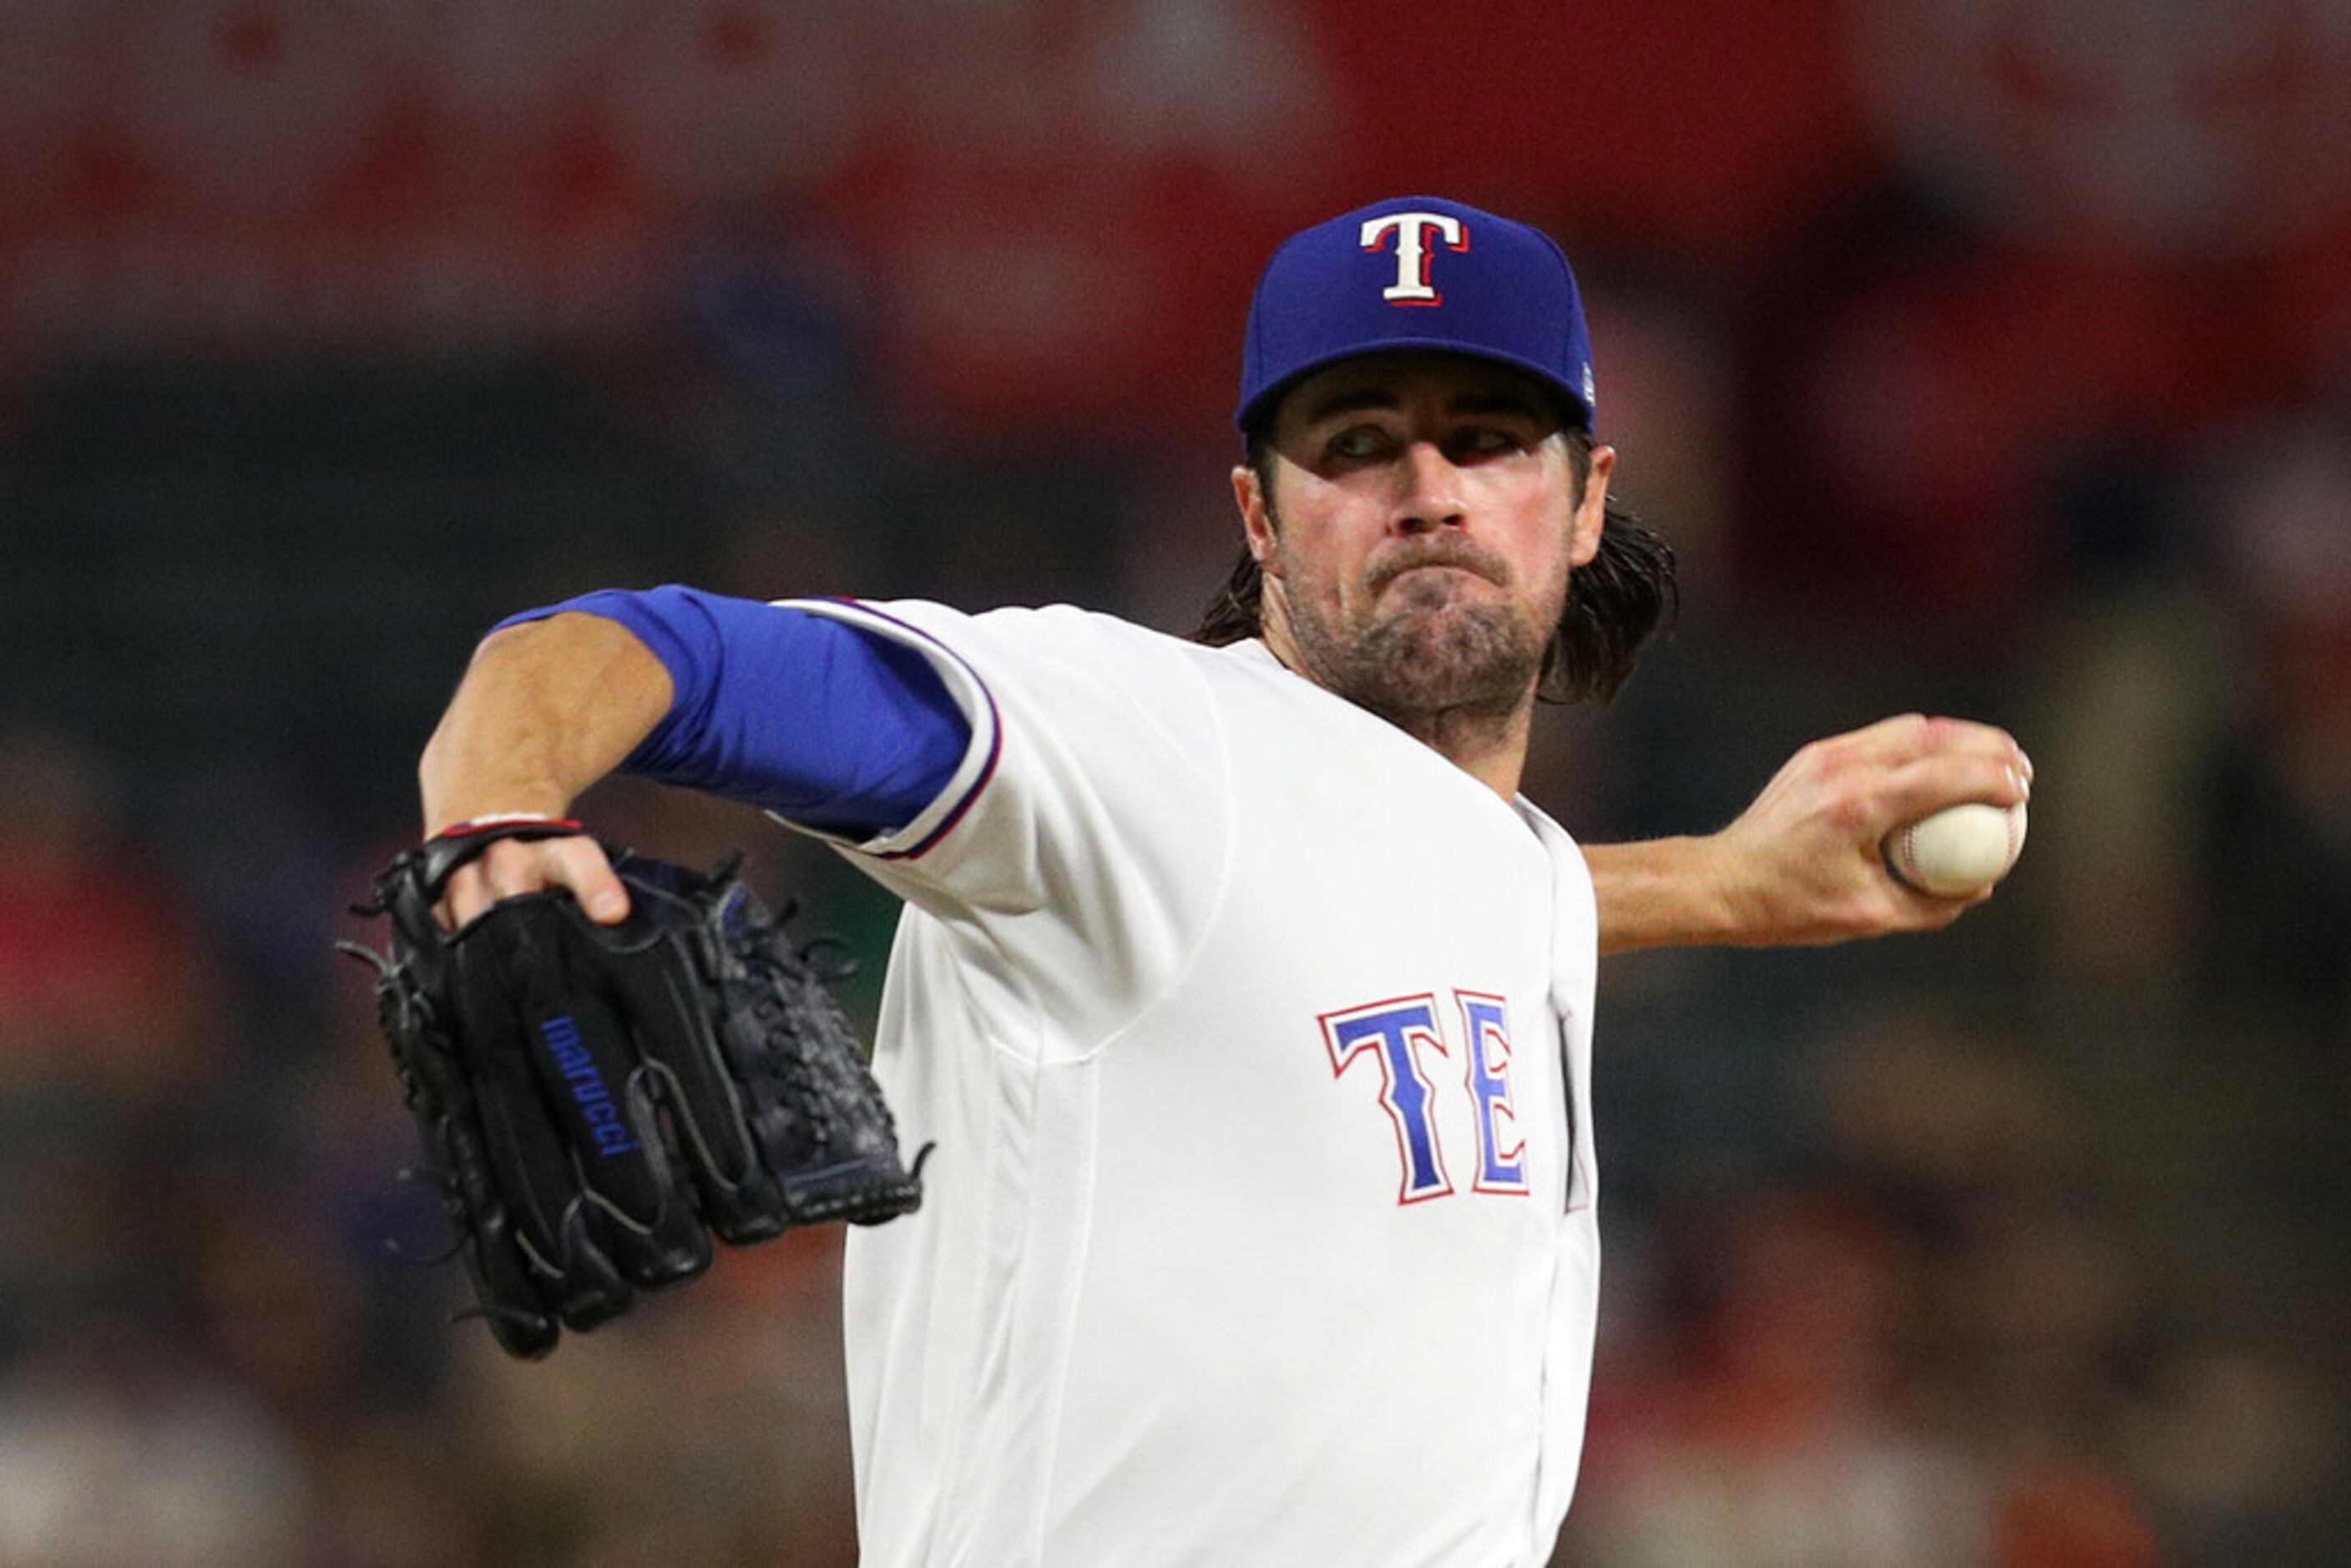 Phillies' Cole Hamels throws first no-hitter against Cubs in 50